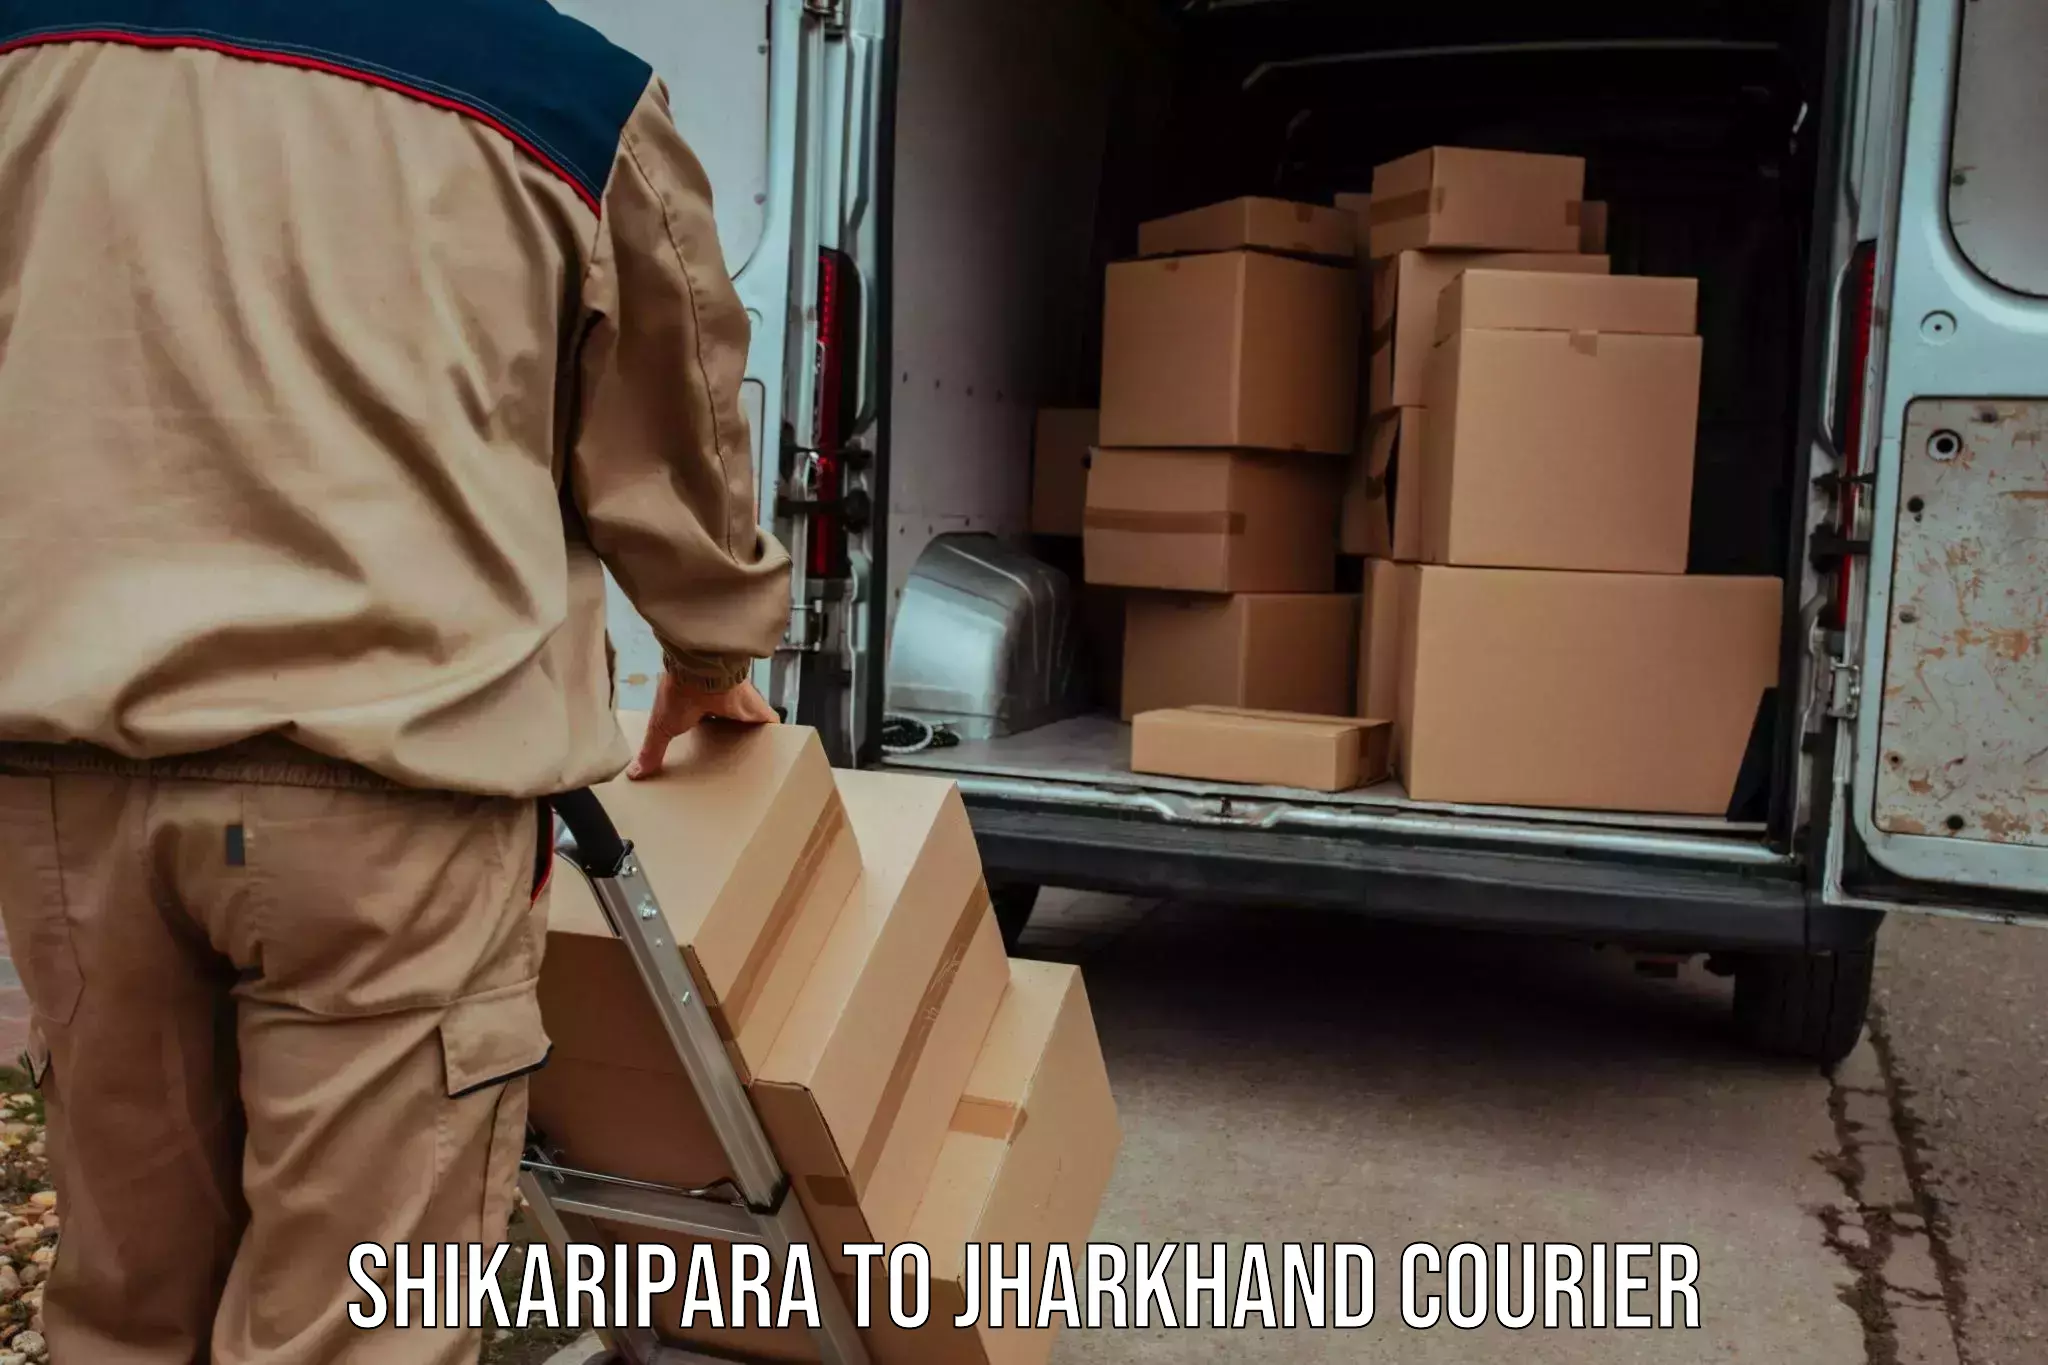 Cost-effective courier options Shikaripara to Ranchi